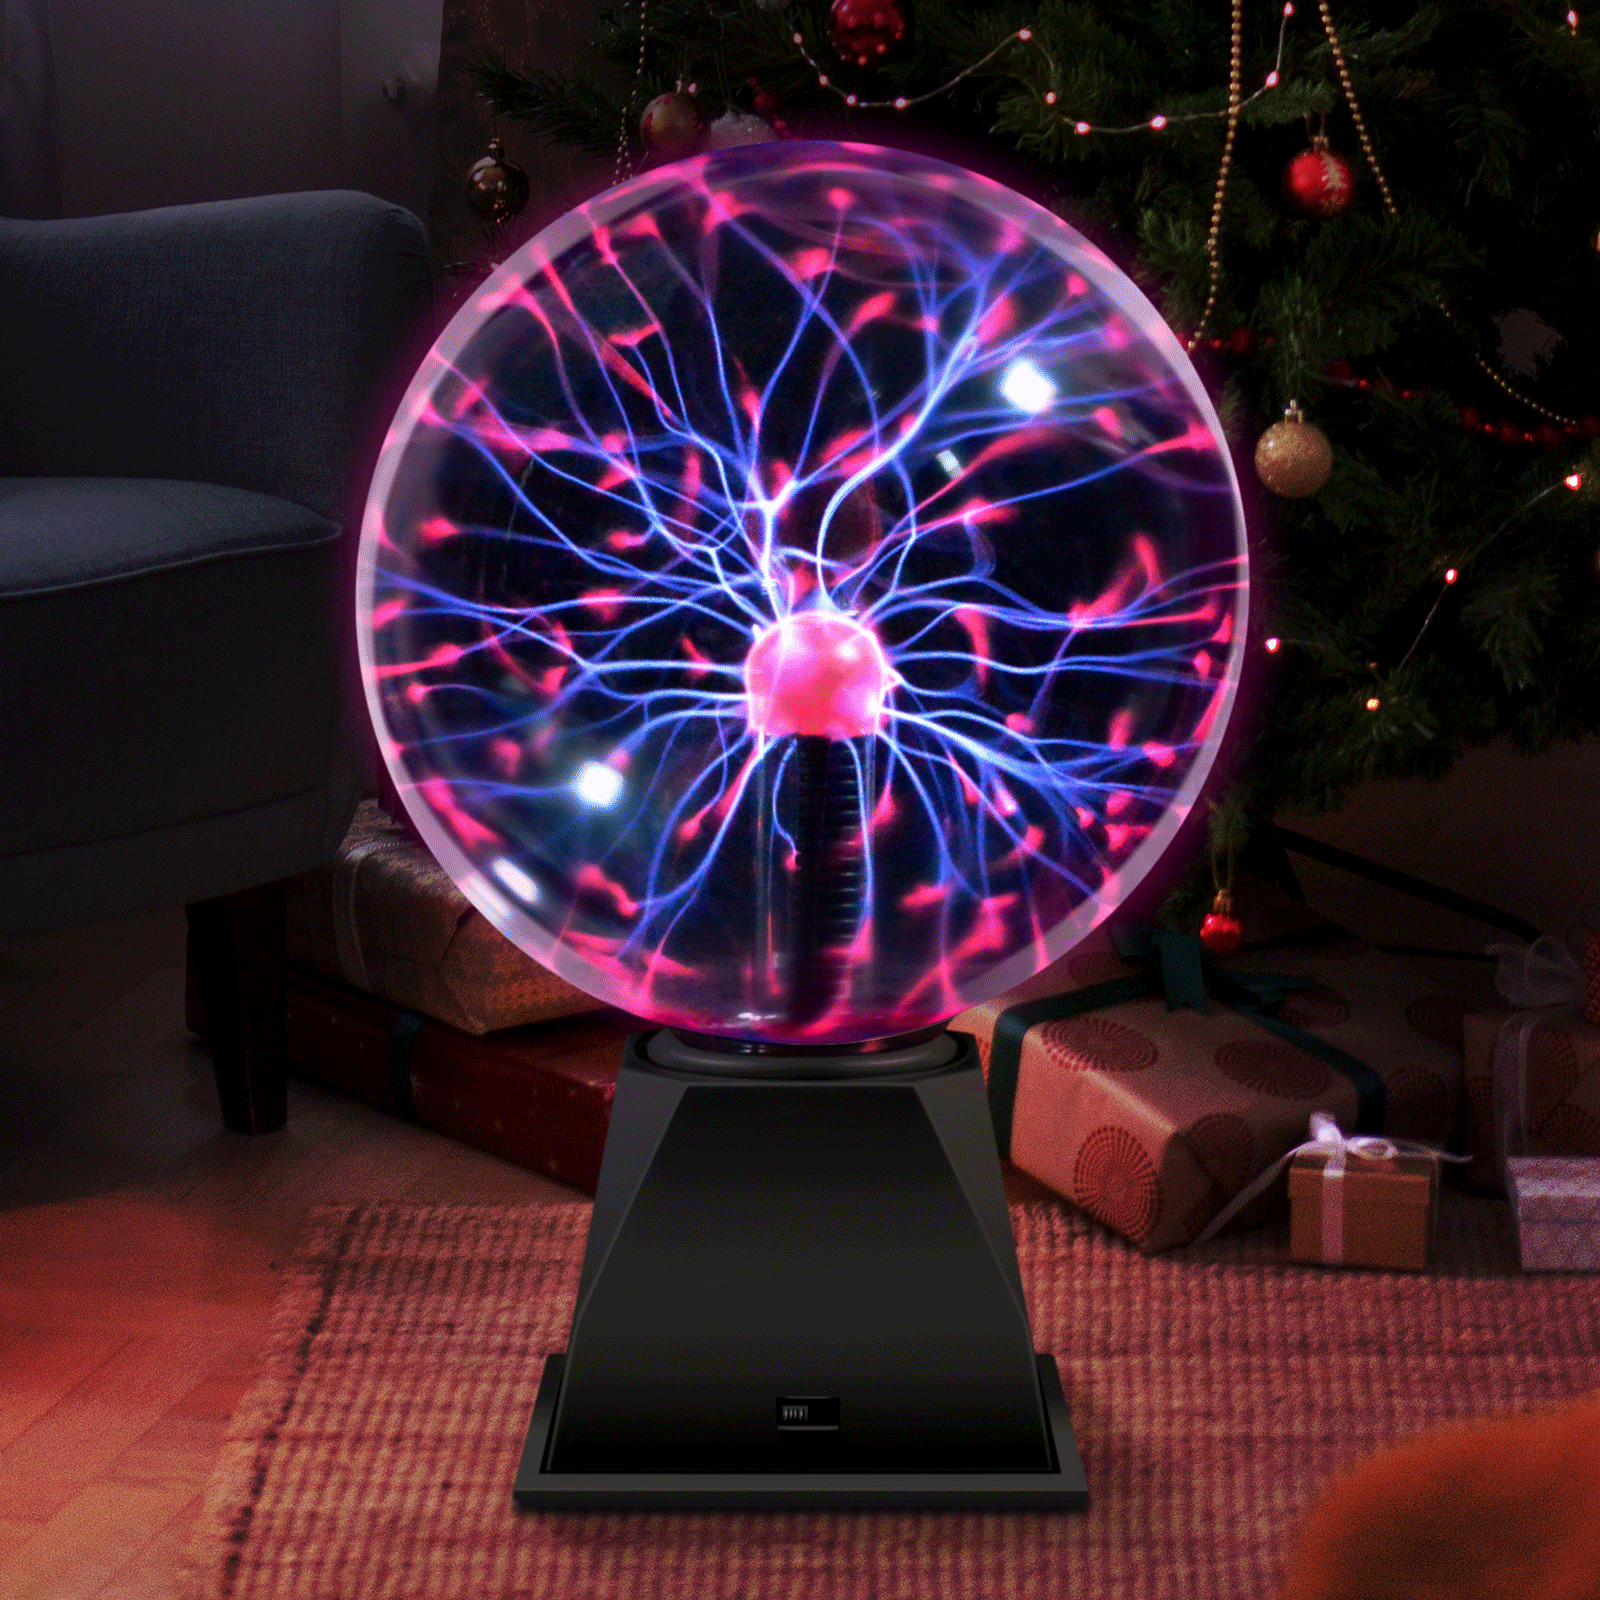 New Plasma Ball Lamp Sphere Glow Night Light Decor Party Gift box Wall Charge 